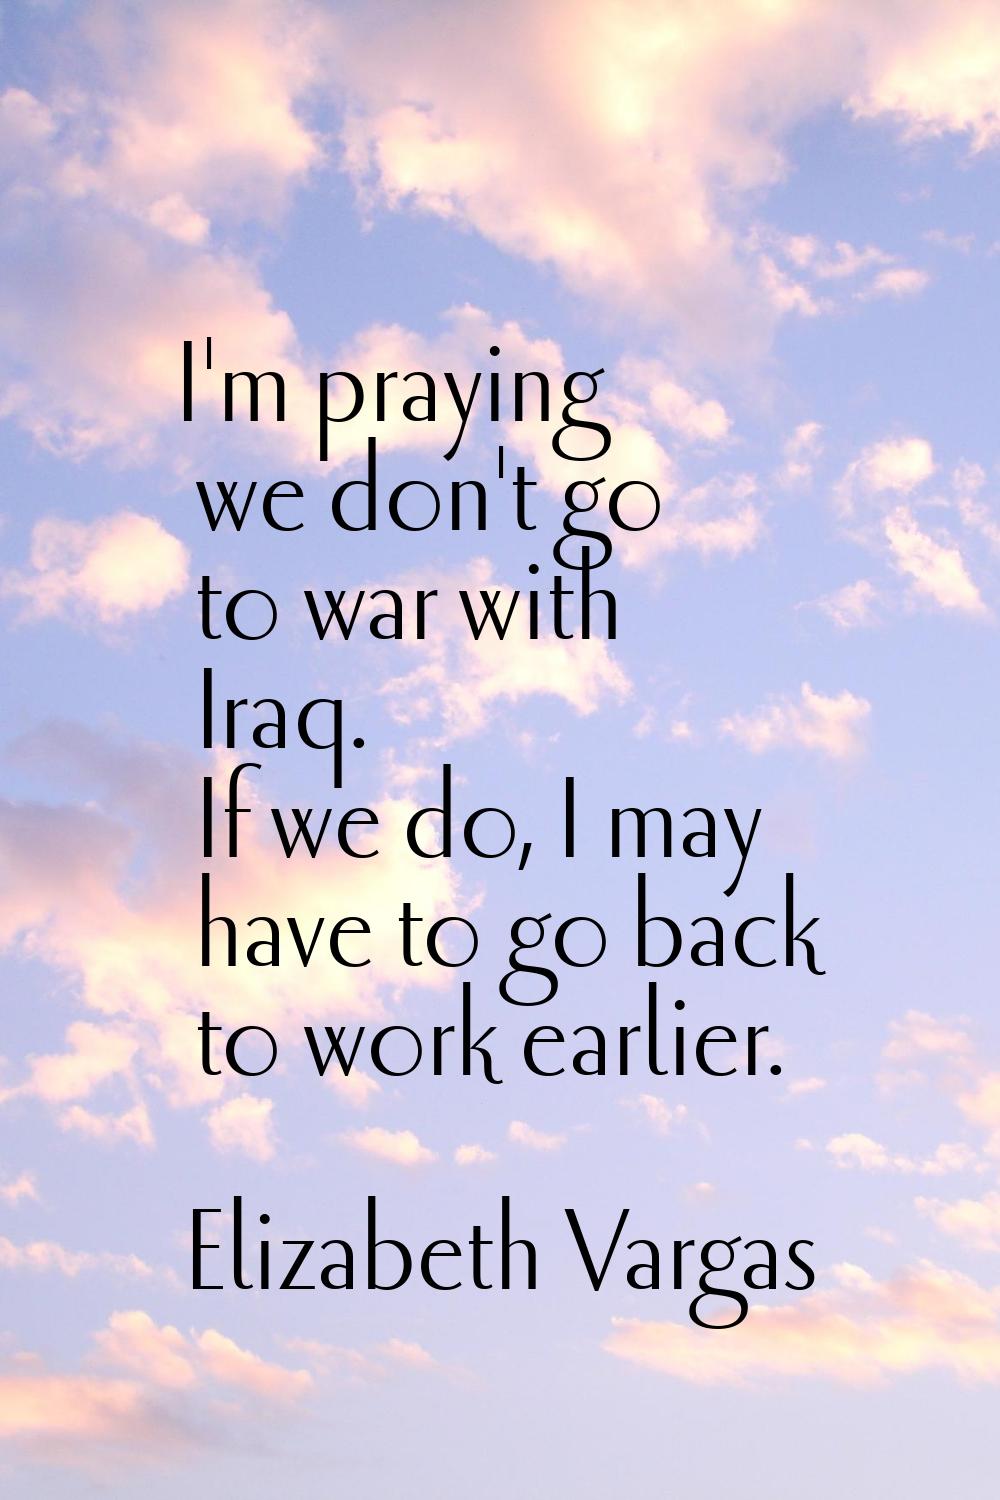 I'm praying we don't go to war with Iraq. If we do, I may have to go back to work earlier.